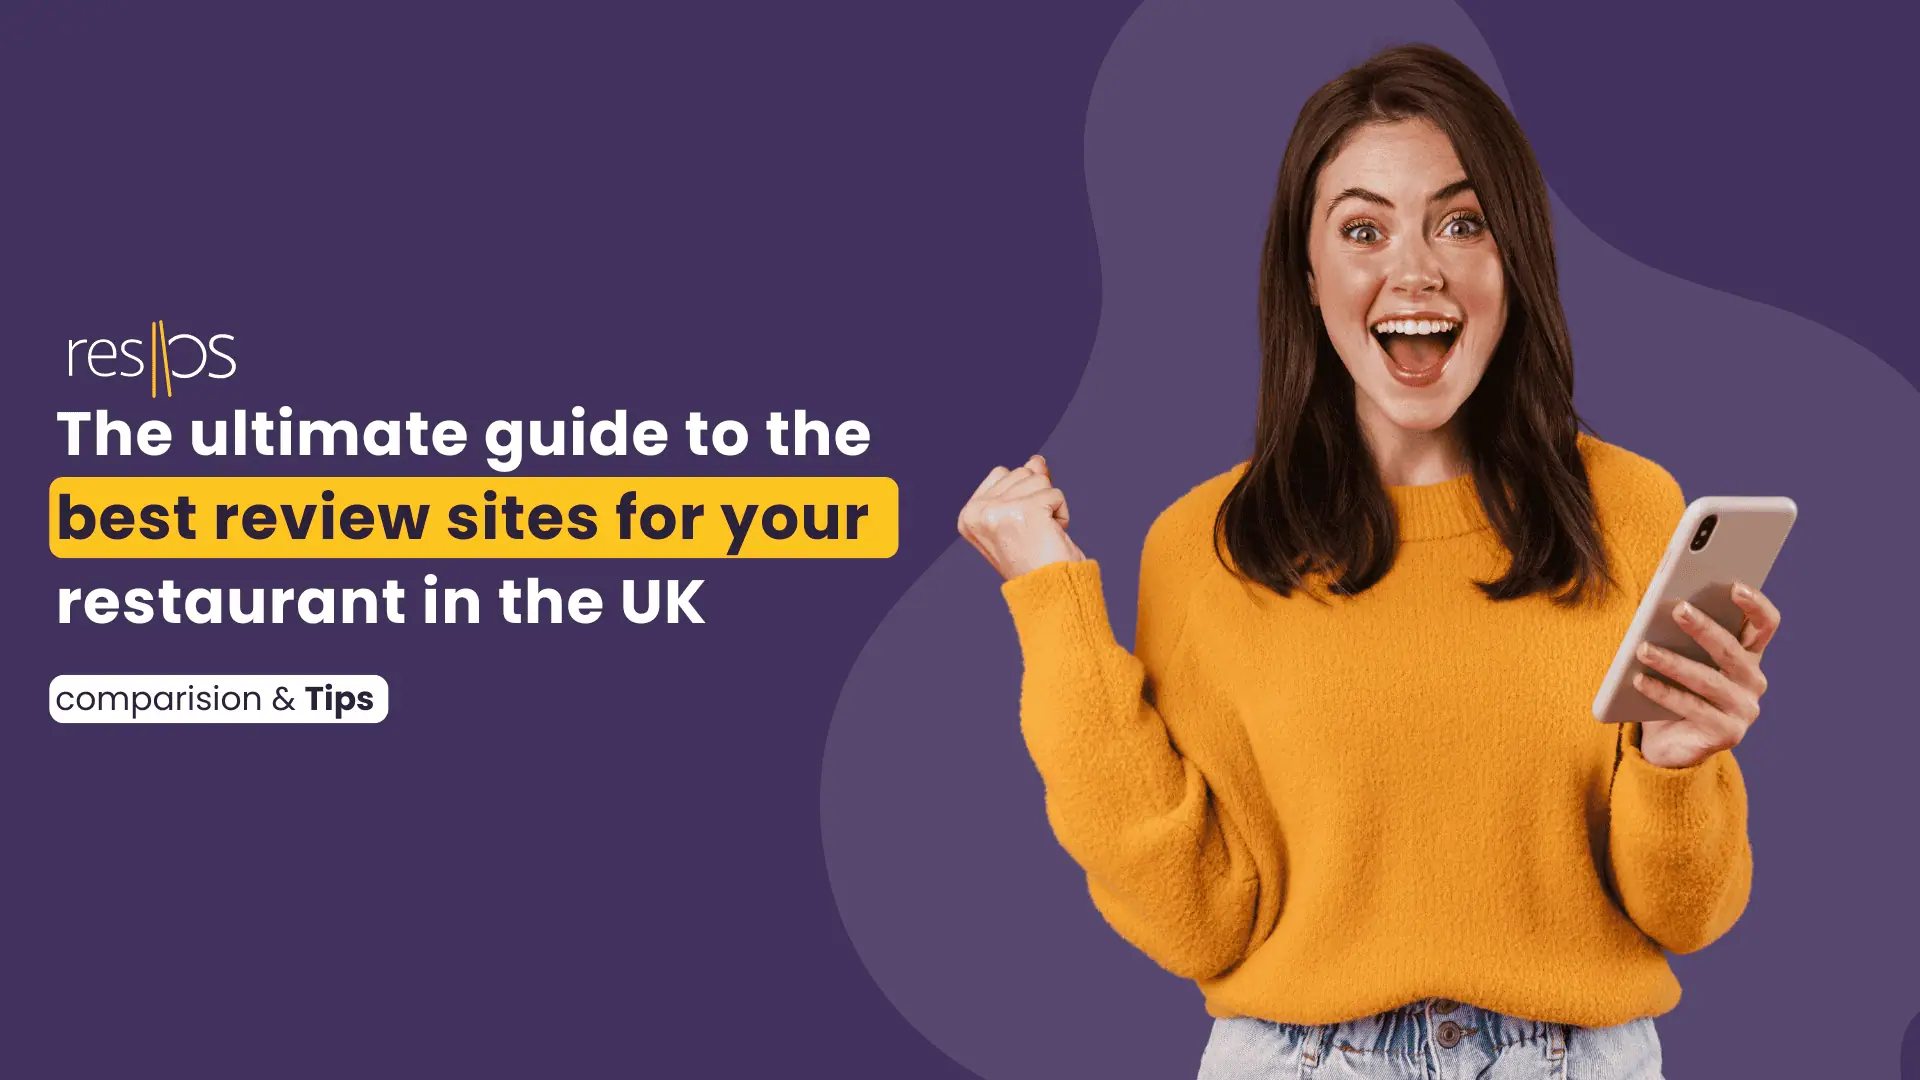 The ultimate guide to the best review sites for your restaurant in the UK